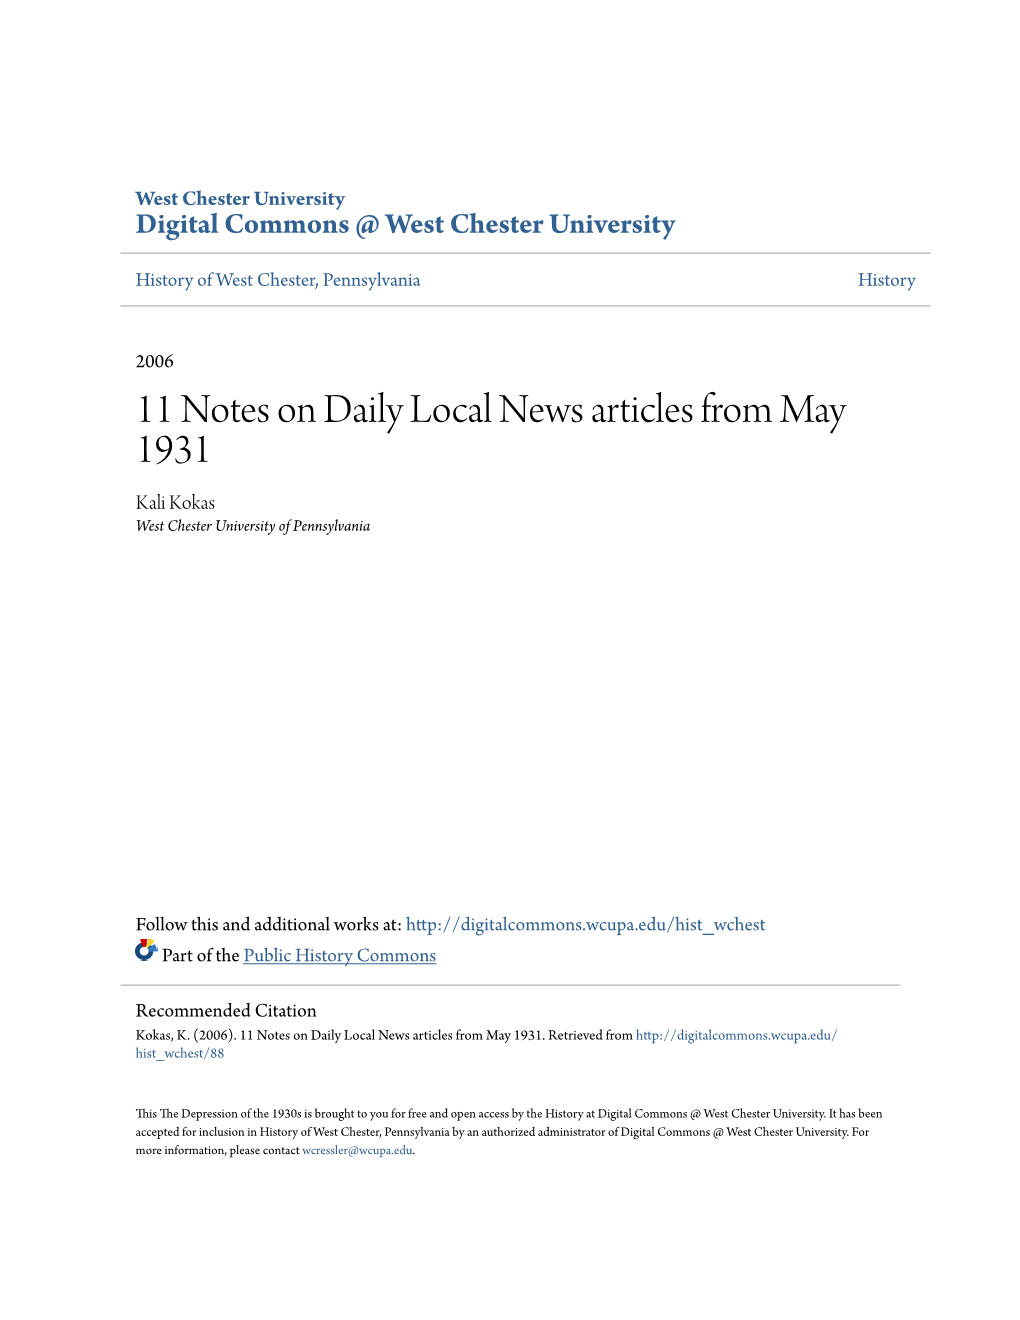 11 Notes on Daily Local News Articles from May 1931 Kali Kokas West Chester University of Pennsylvania